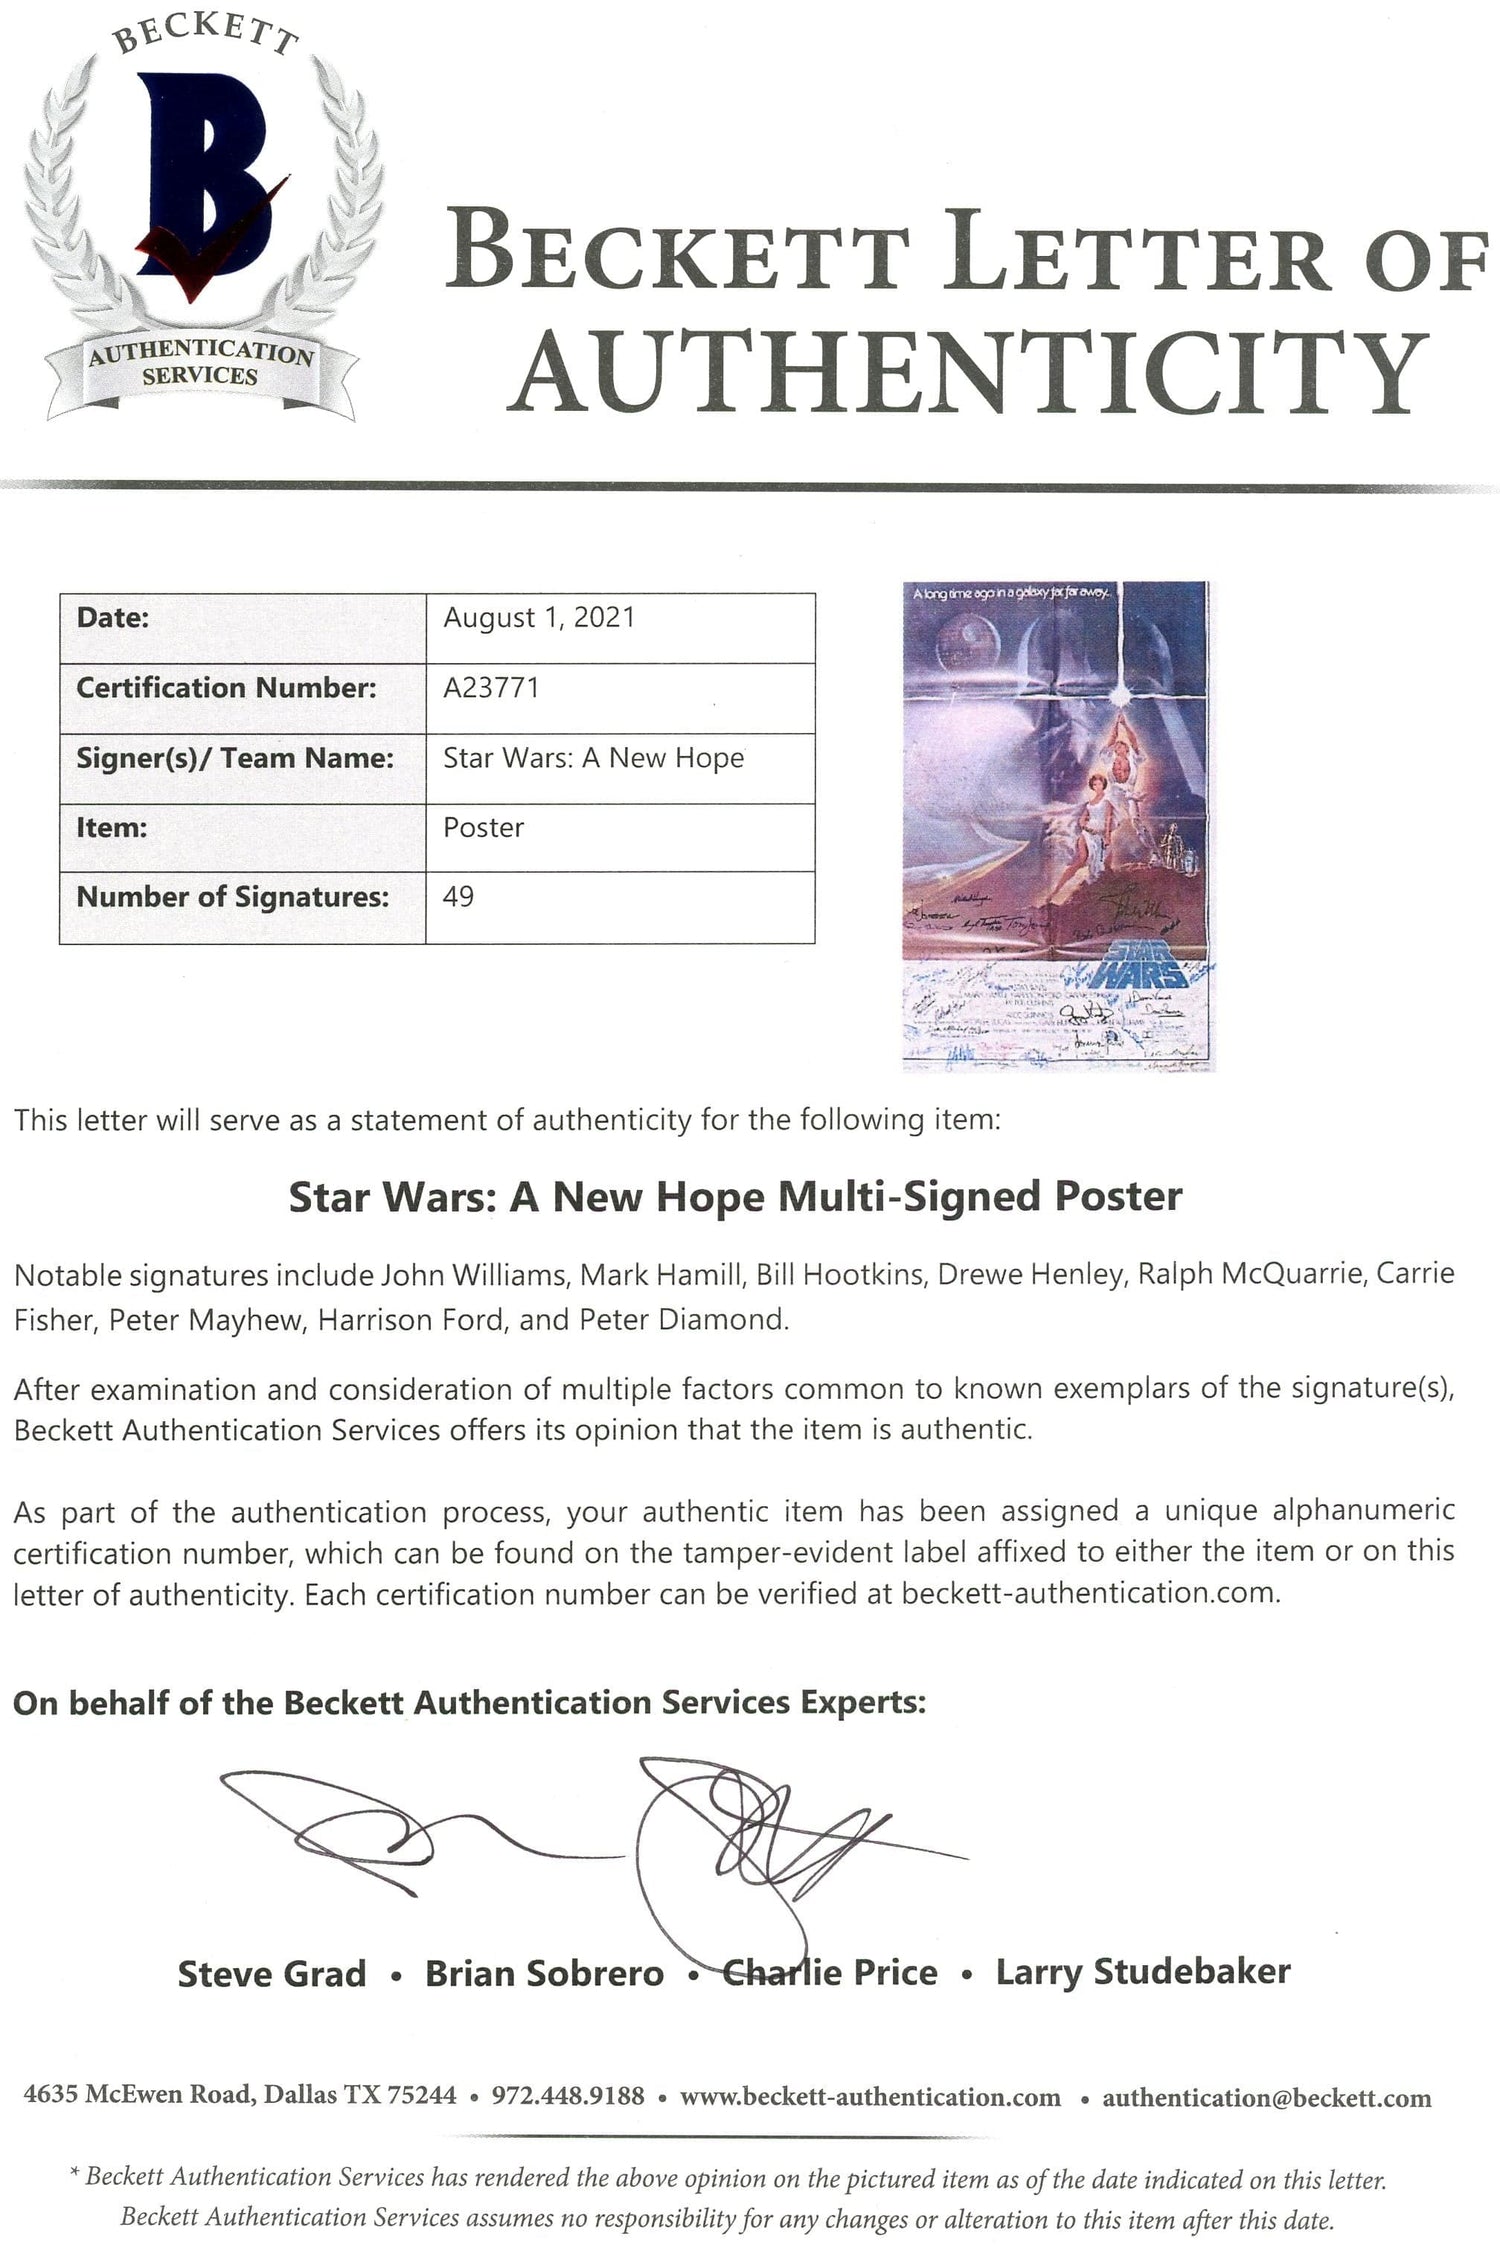 Star Wars: A New Hope Multi-Signed Poster COA